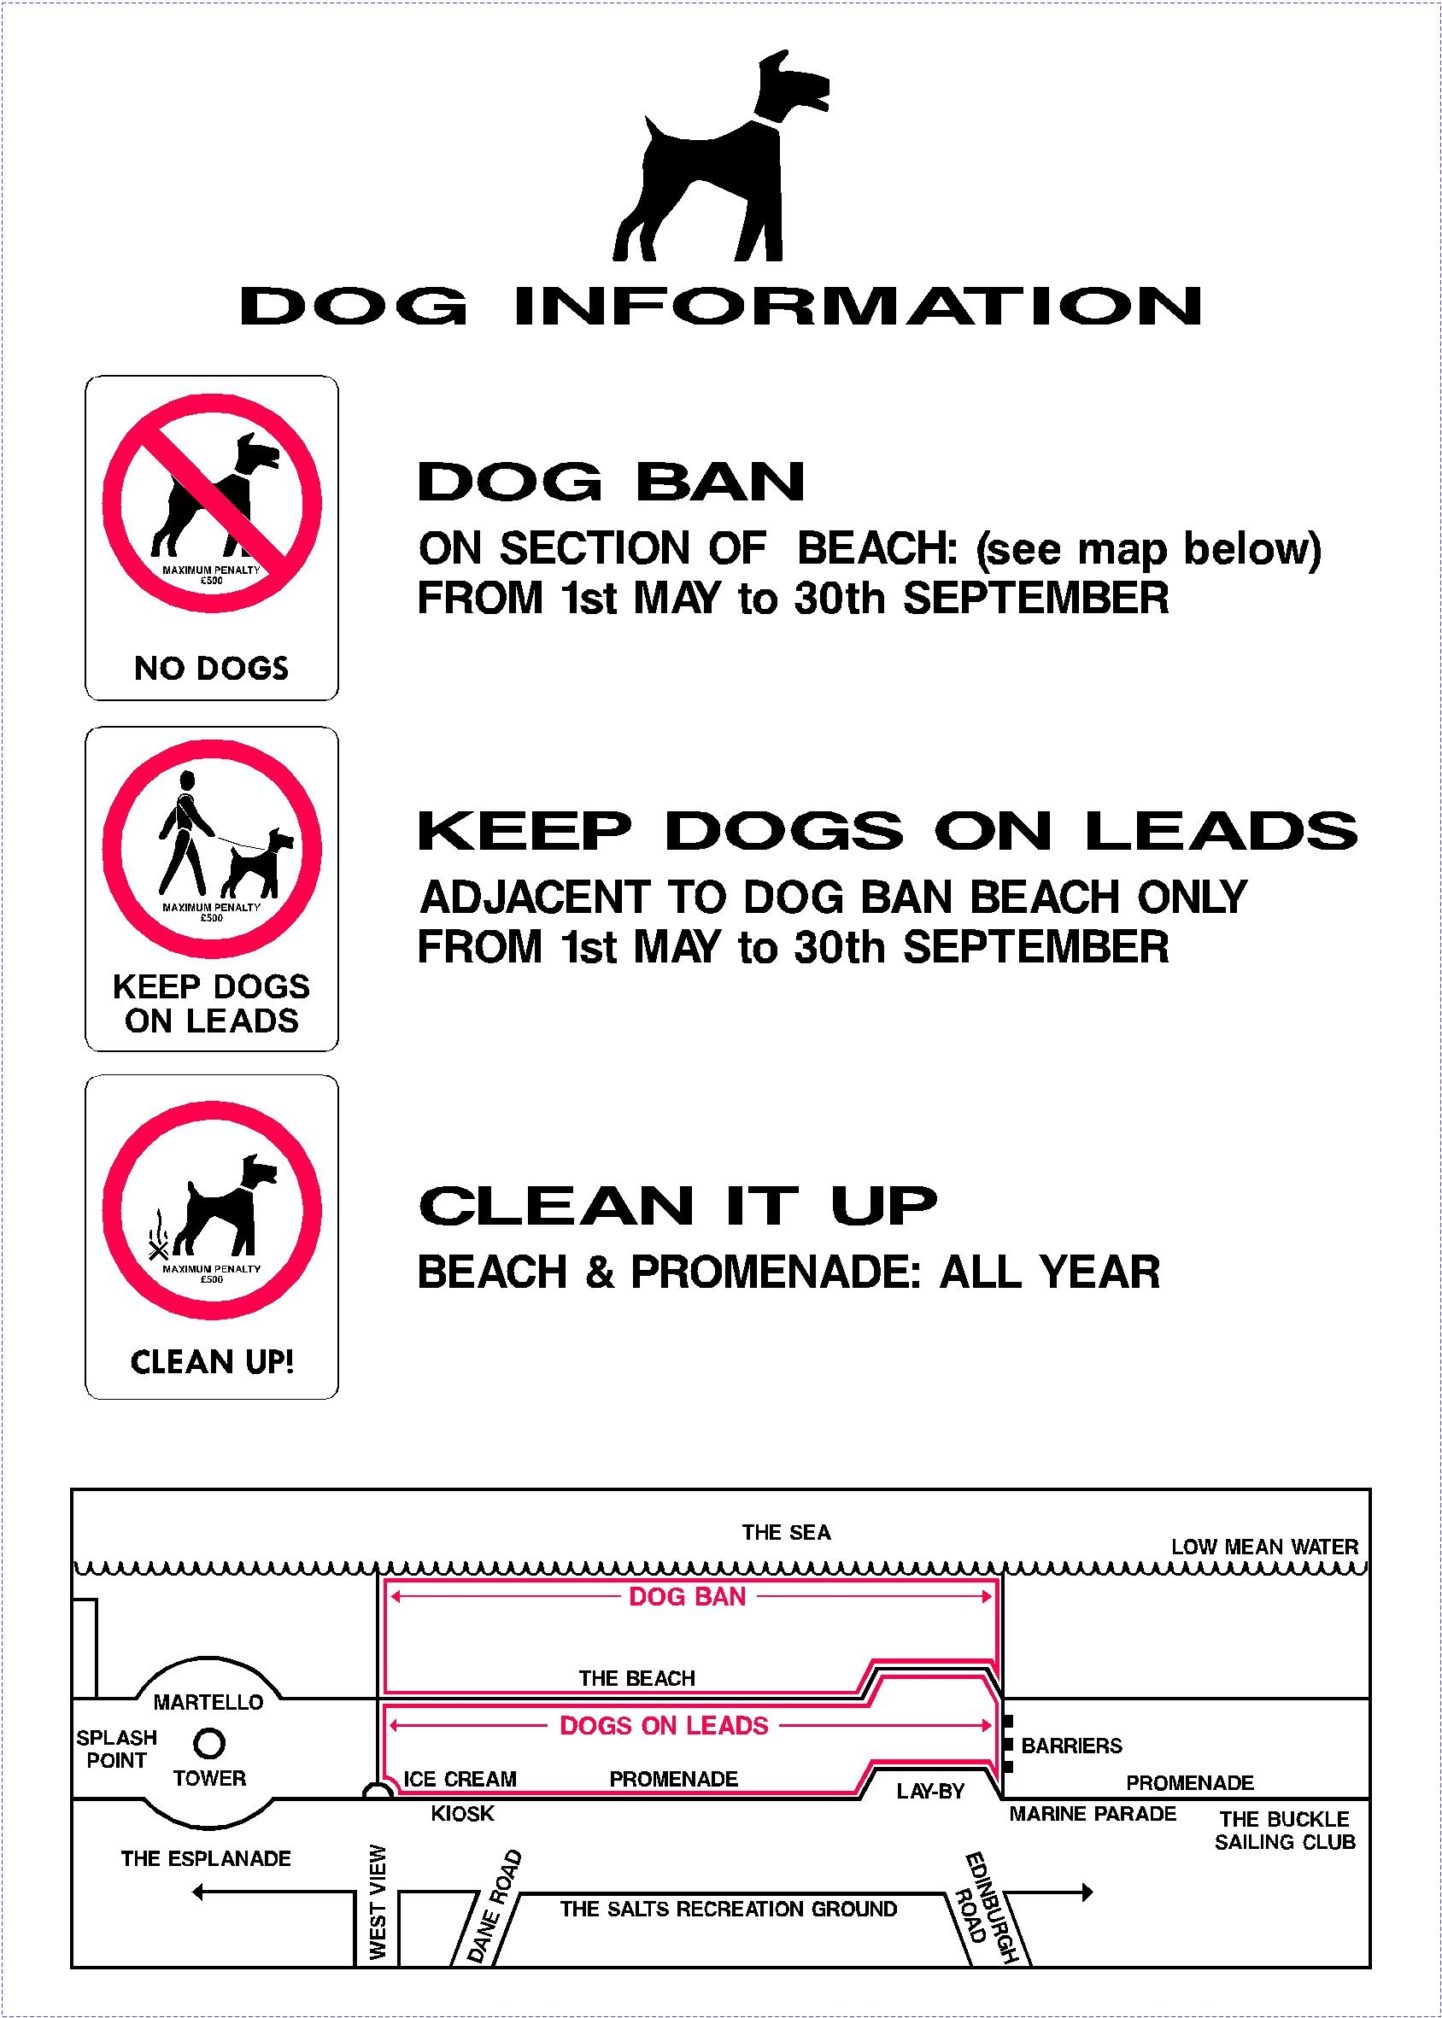 Dogs on Beach bylaw poster